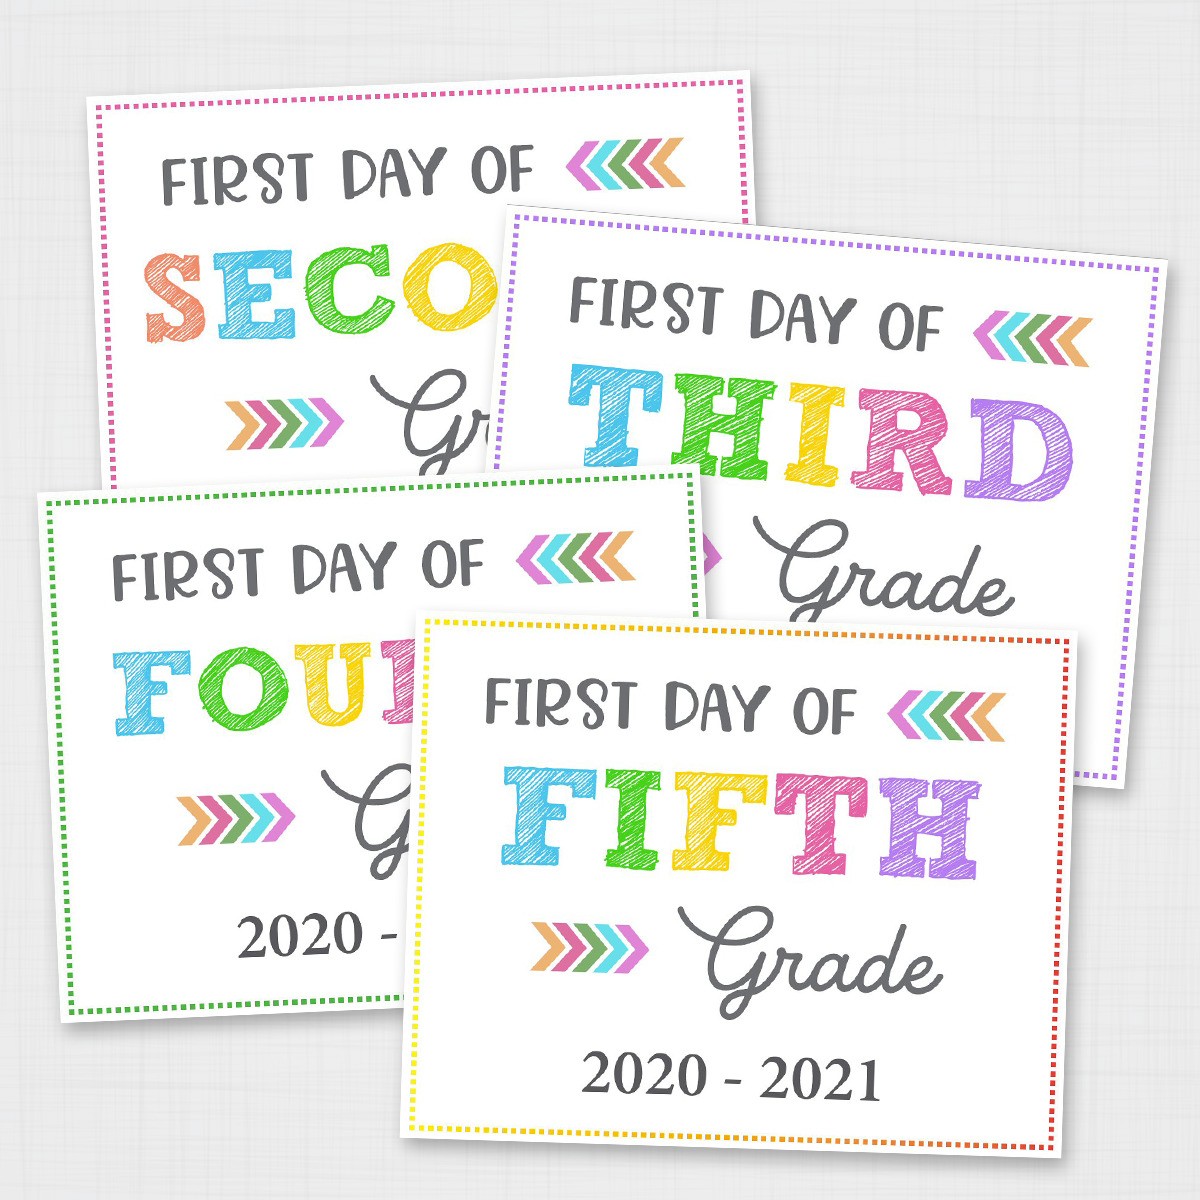 free-printable-first-day-of-signs-paper-trail-design-riset